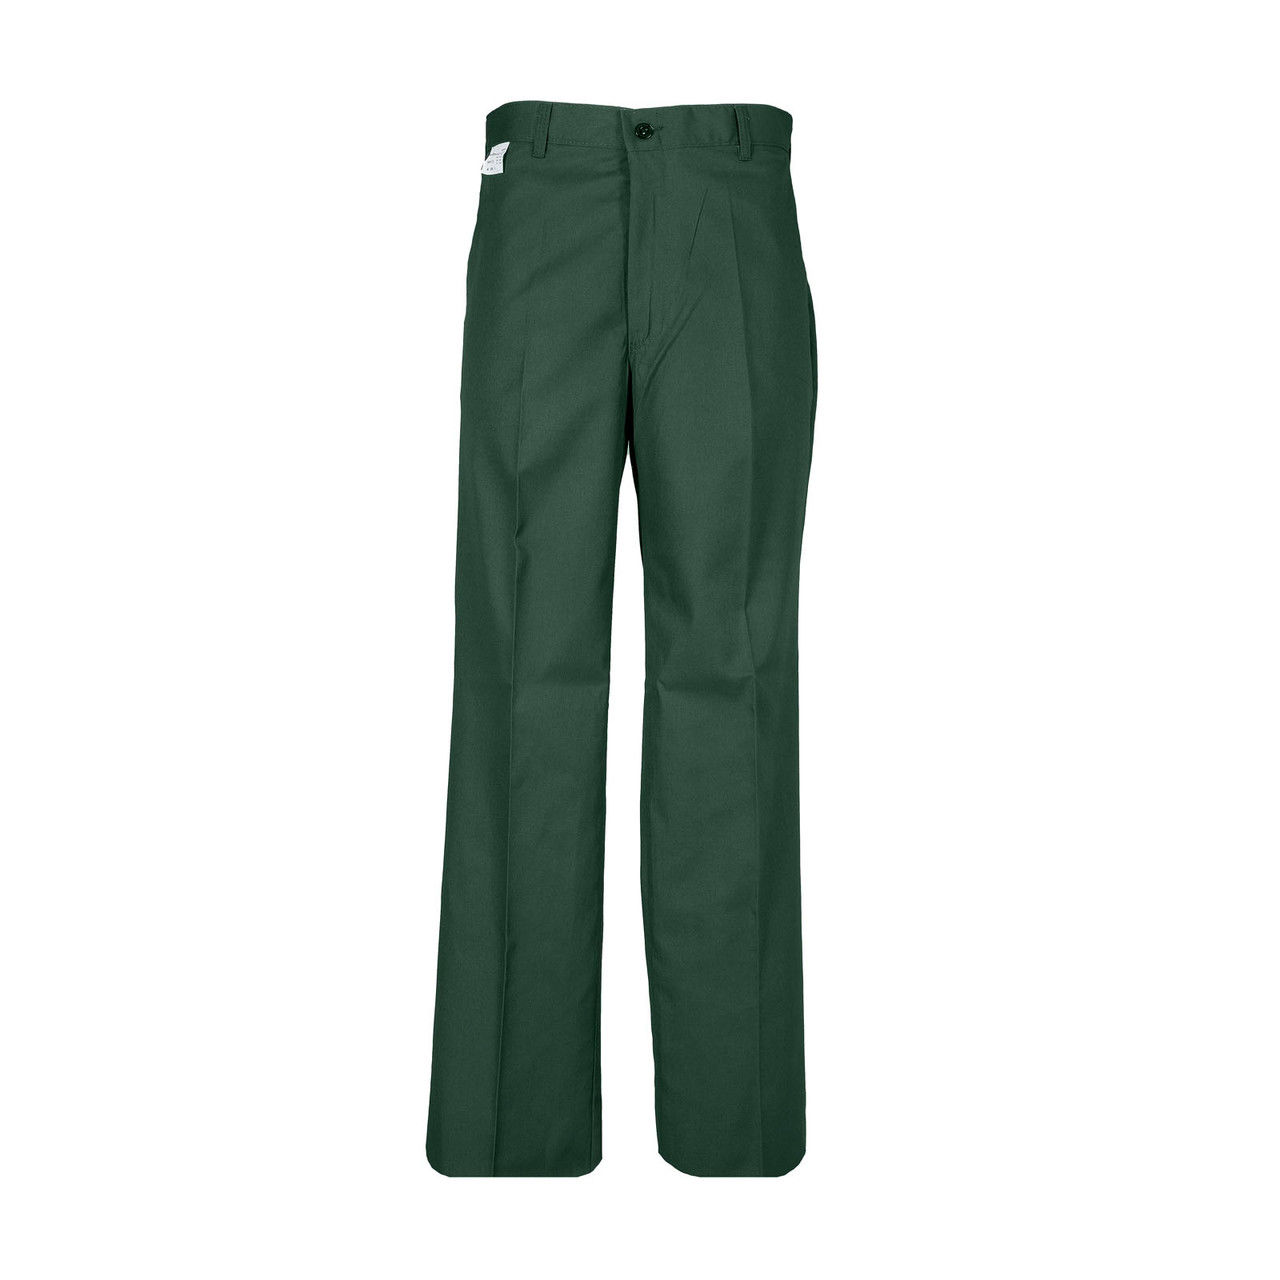 What is the fabric makeup of these green work pants?